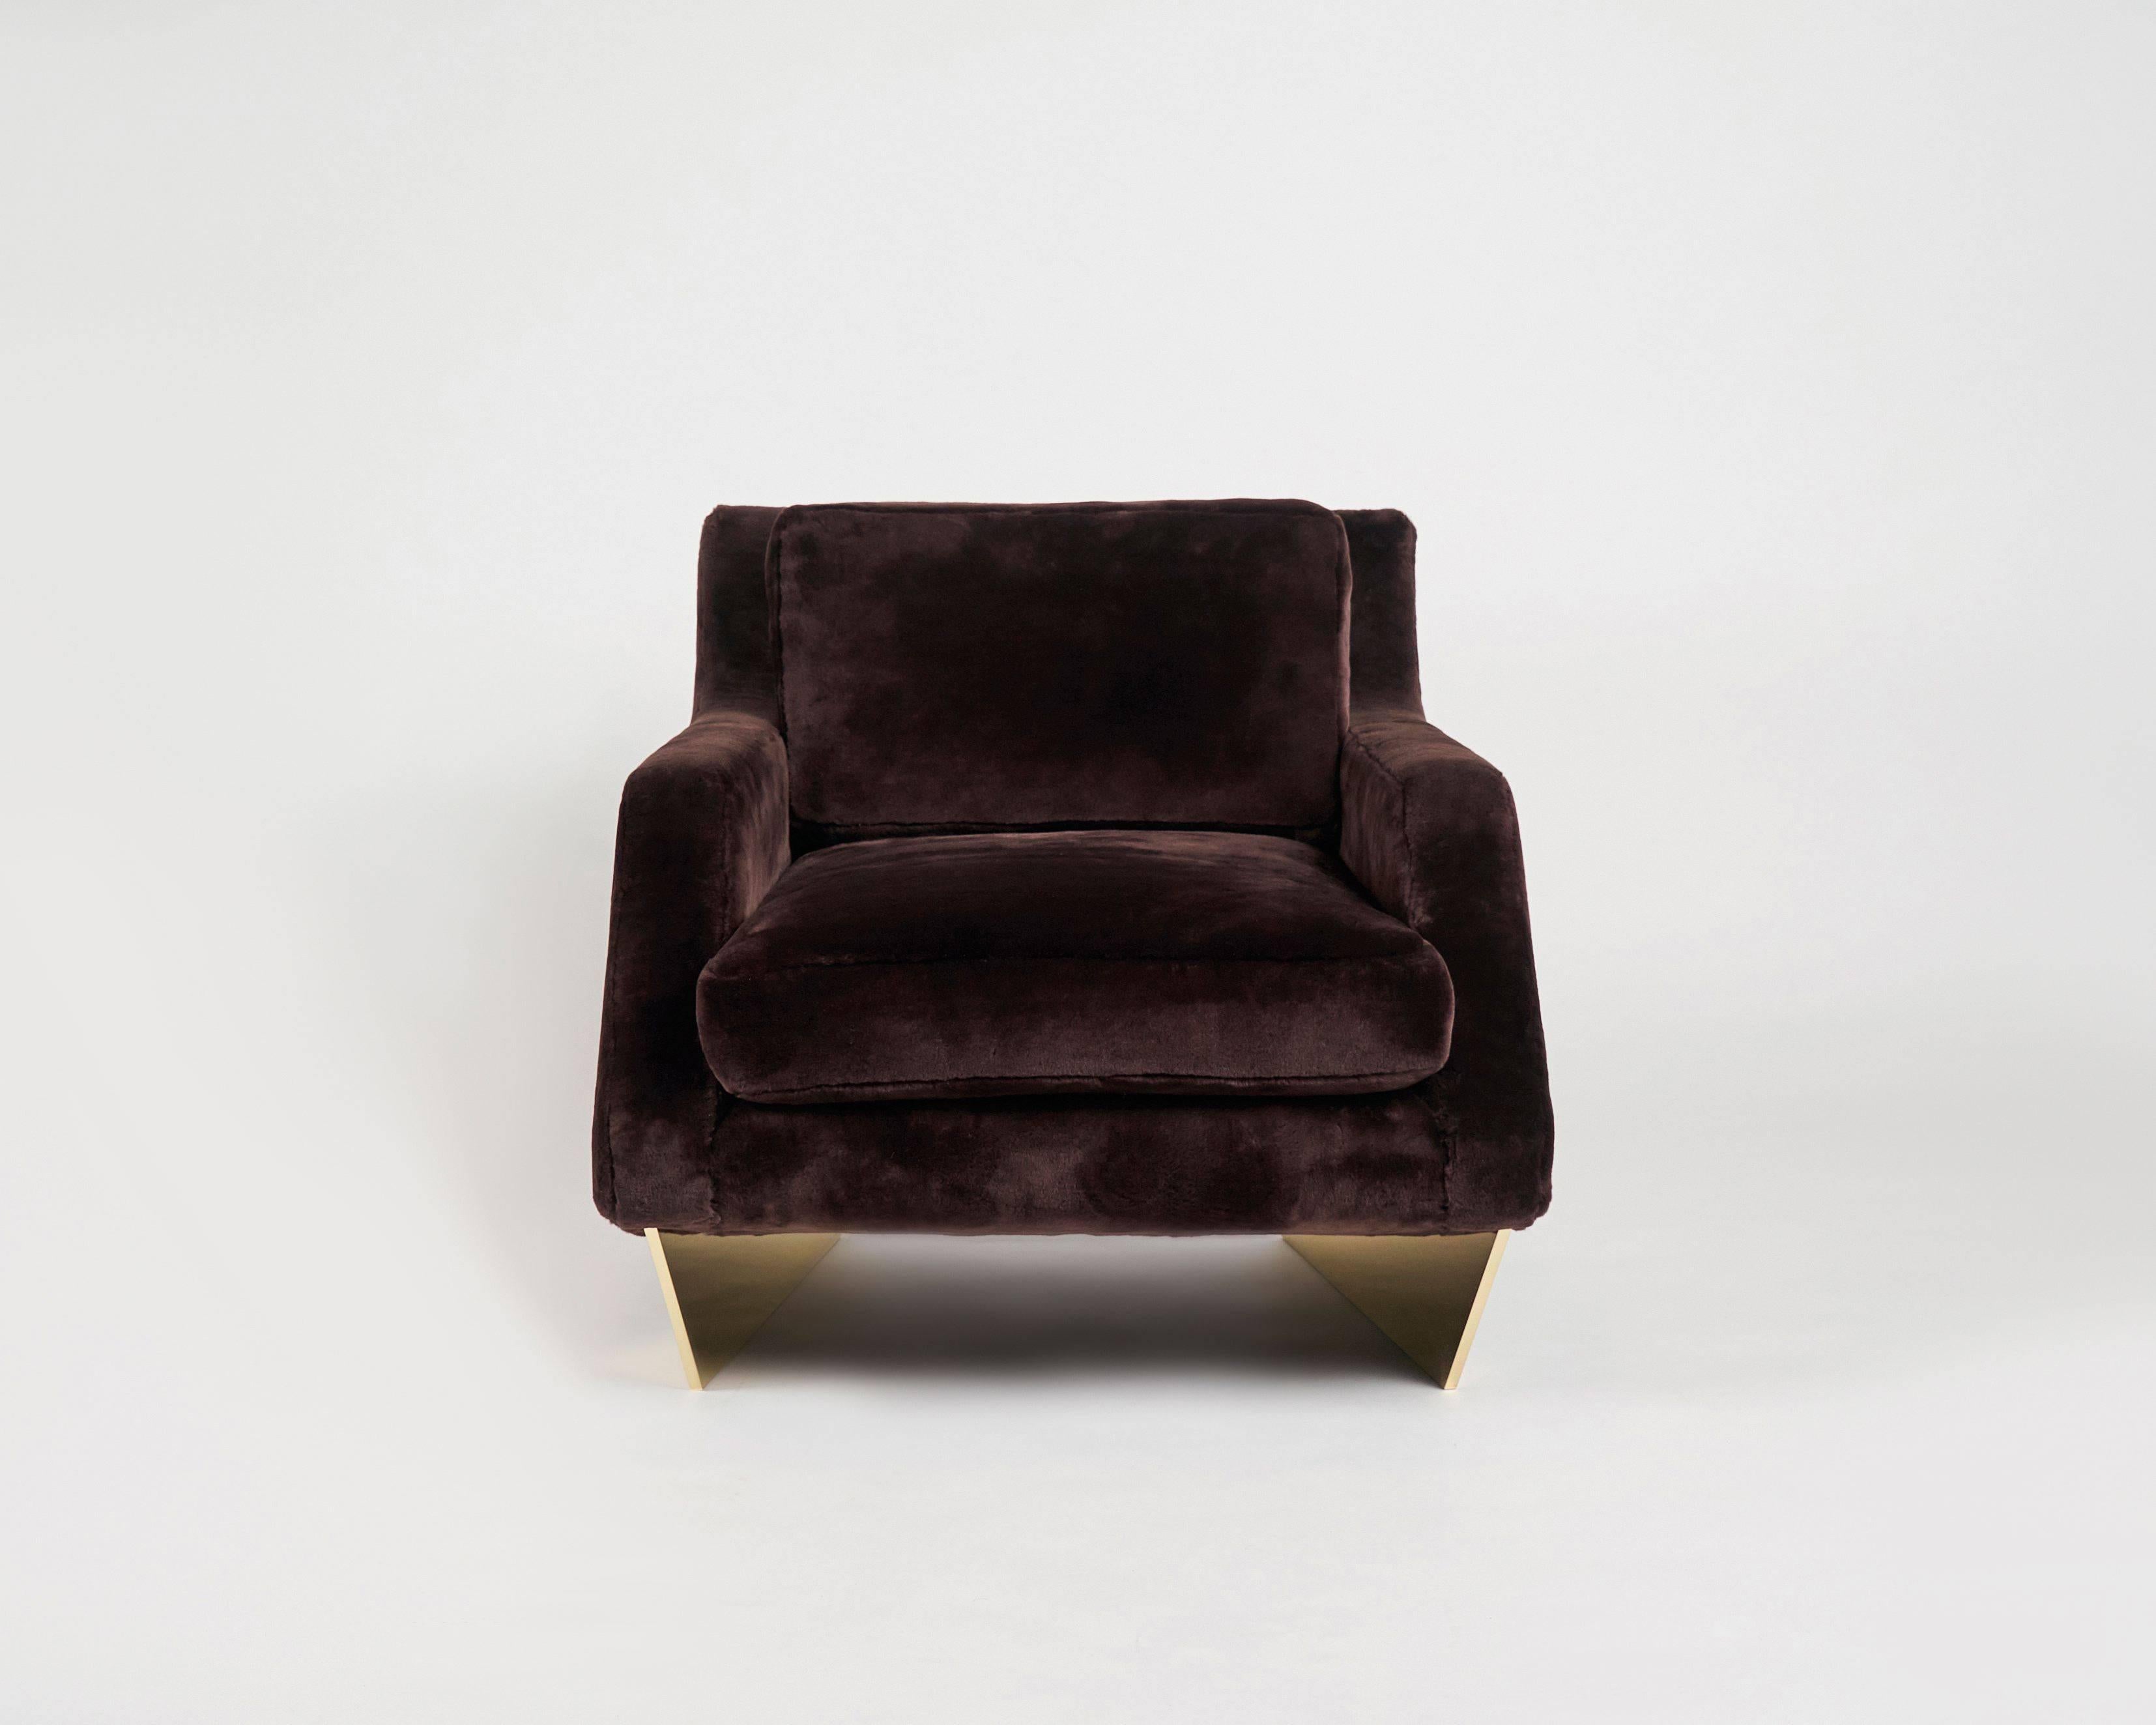 A companion to his well-known sofa, this fabulous armchair by architect William T. Georgis features an extra wide seat and rests on a pair of well-spaced, polished bronze legs.

Legs come in the following finish options:
Polished bronze
Satin nickel